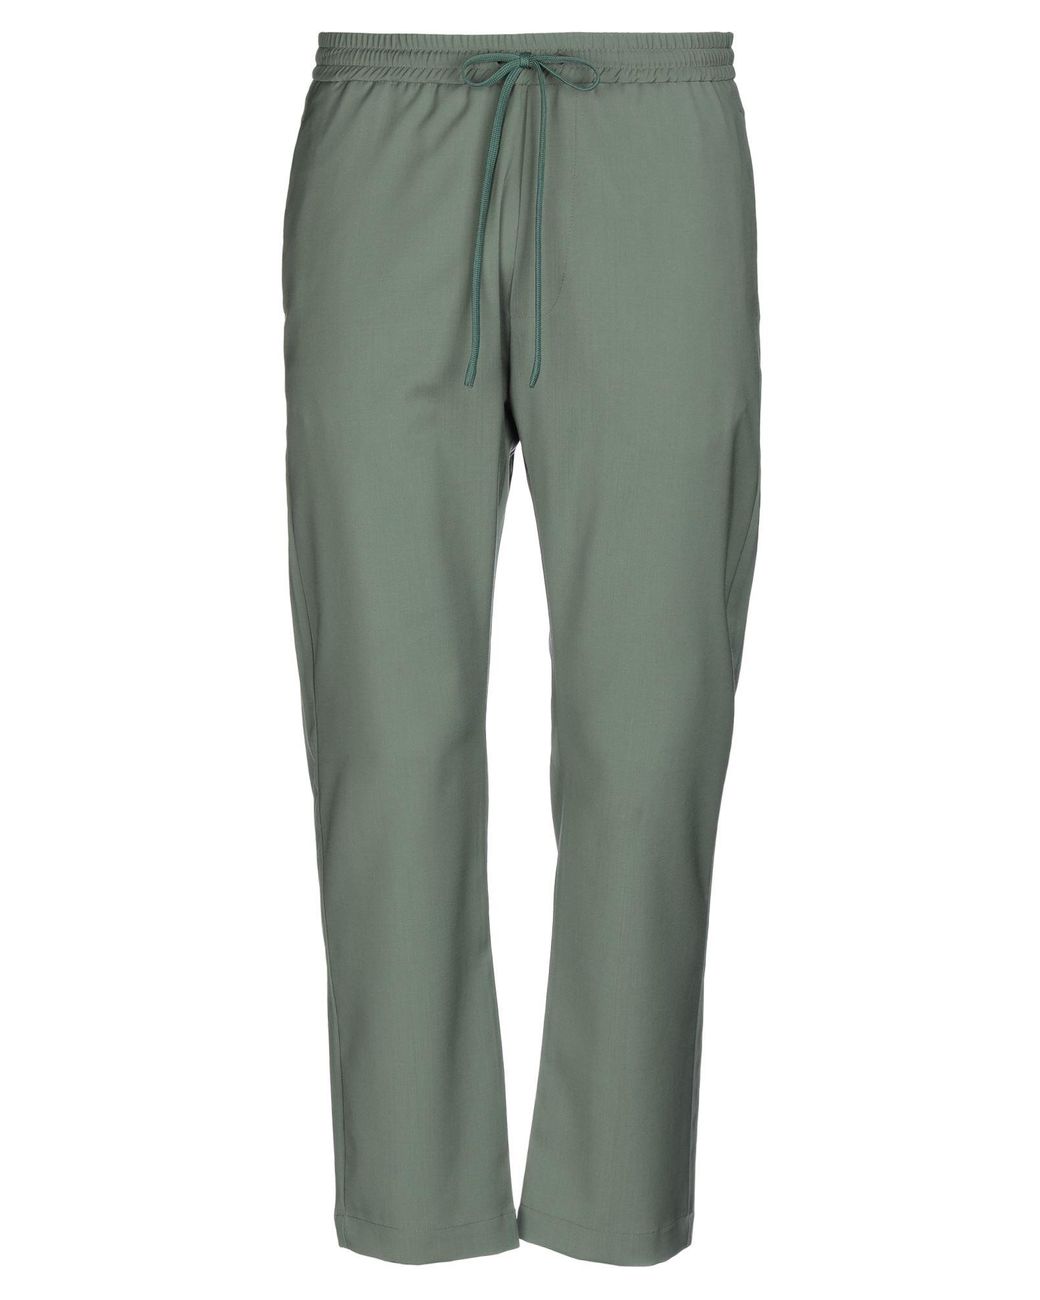 Barena Casual Pants in Military Green (Green) for Men - Lyst